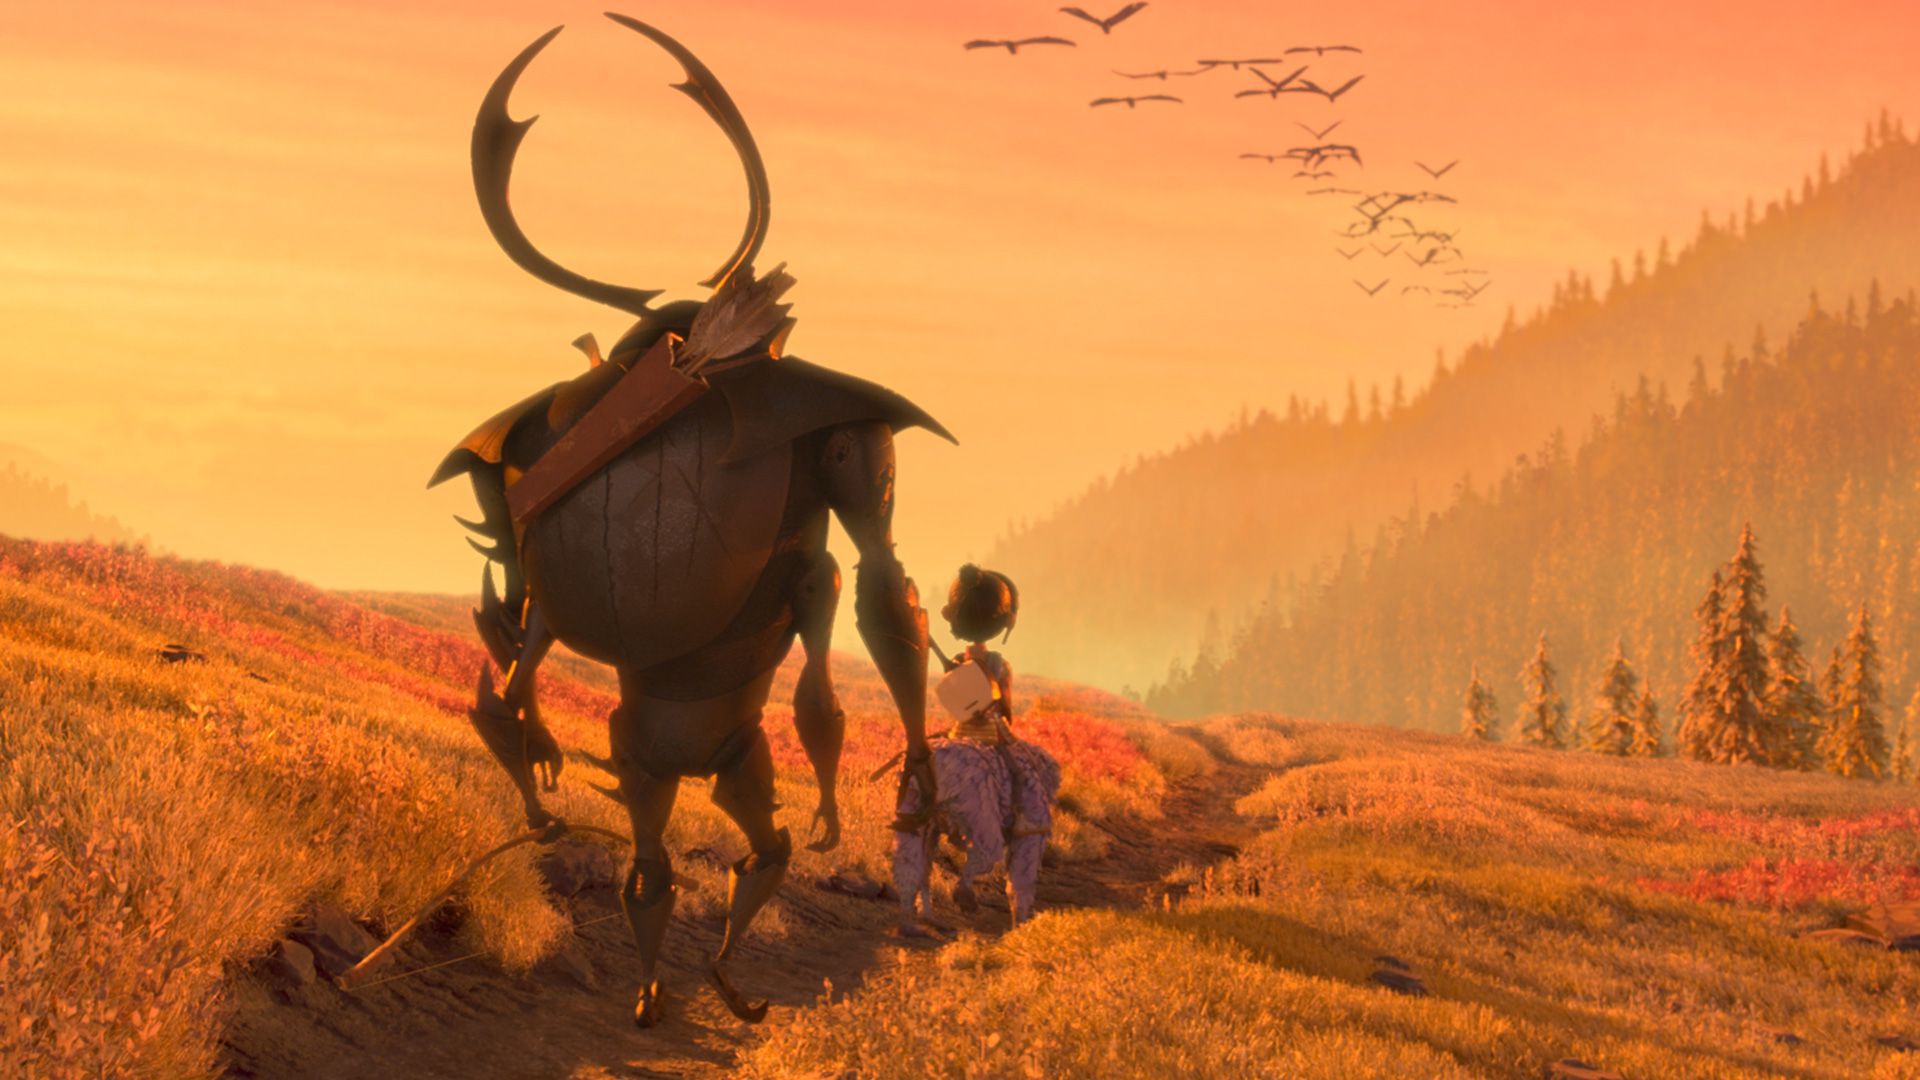 kubo-and-the-two-strings-image